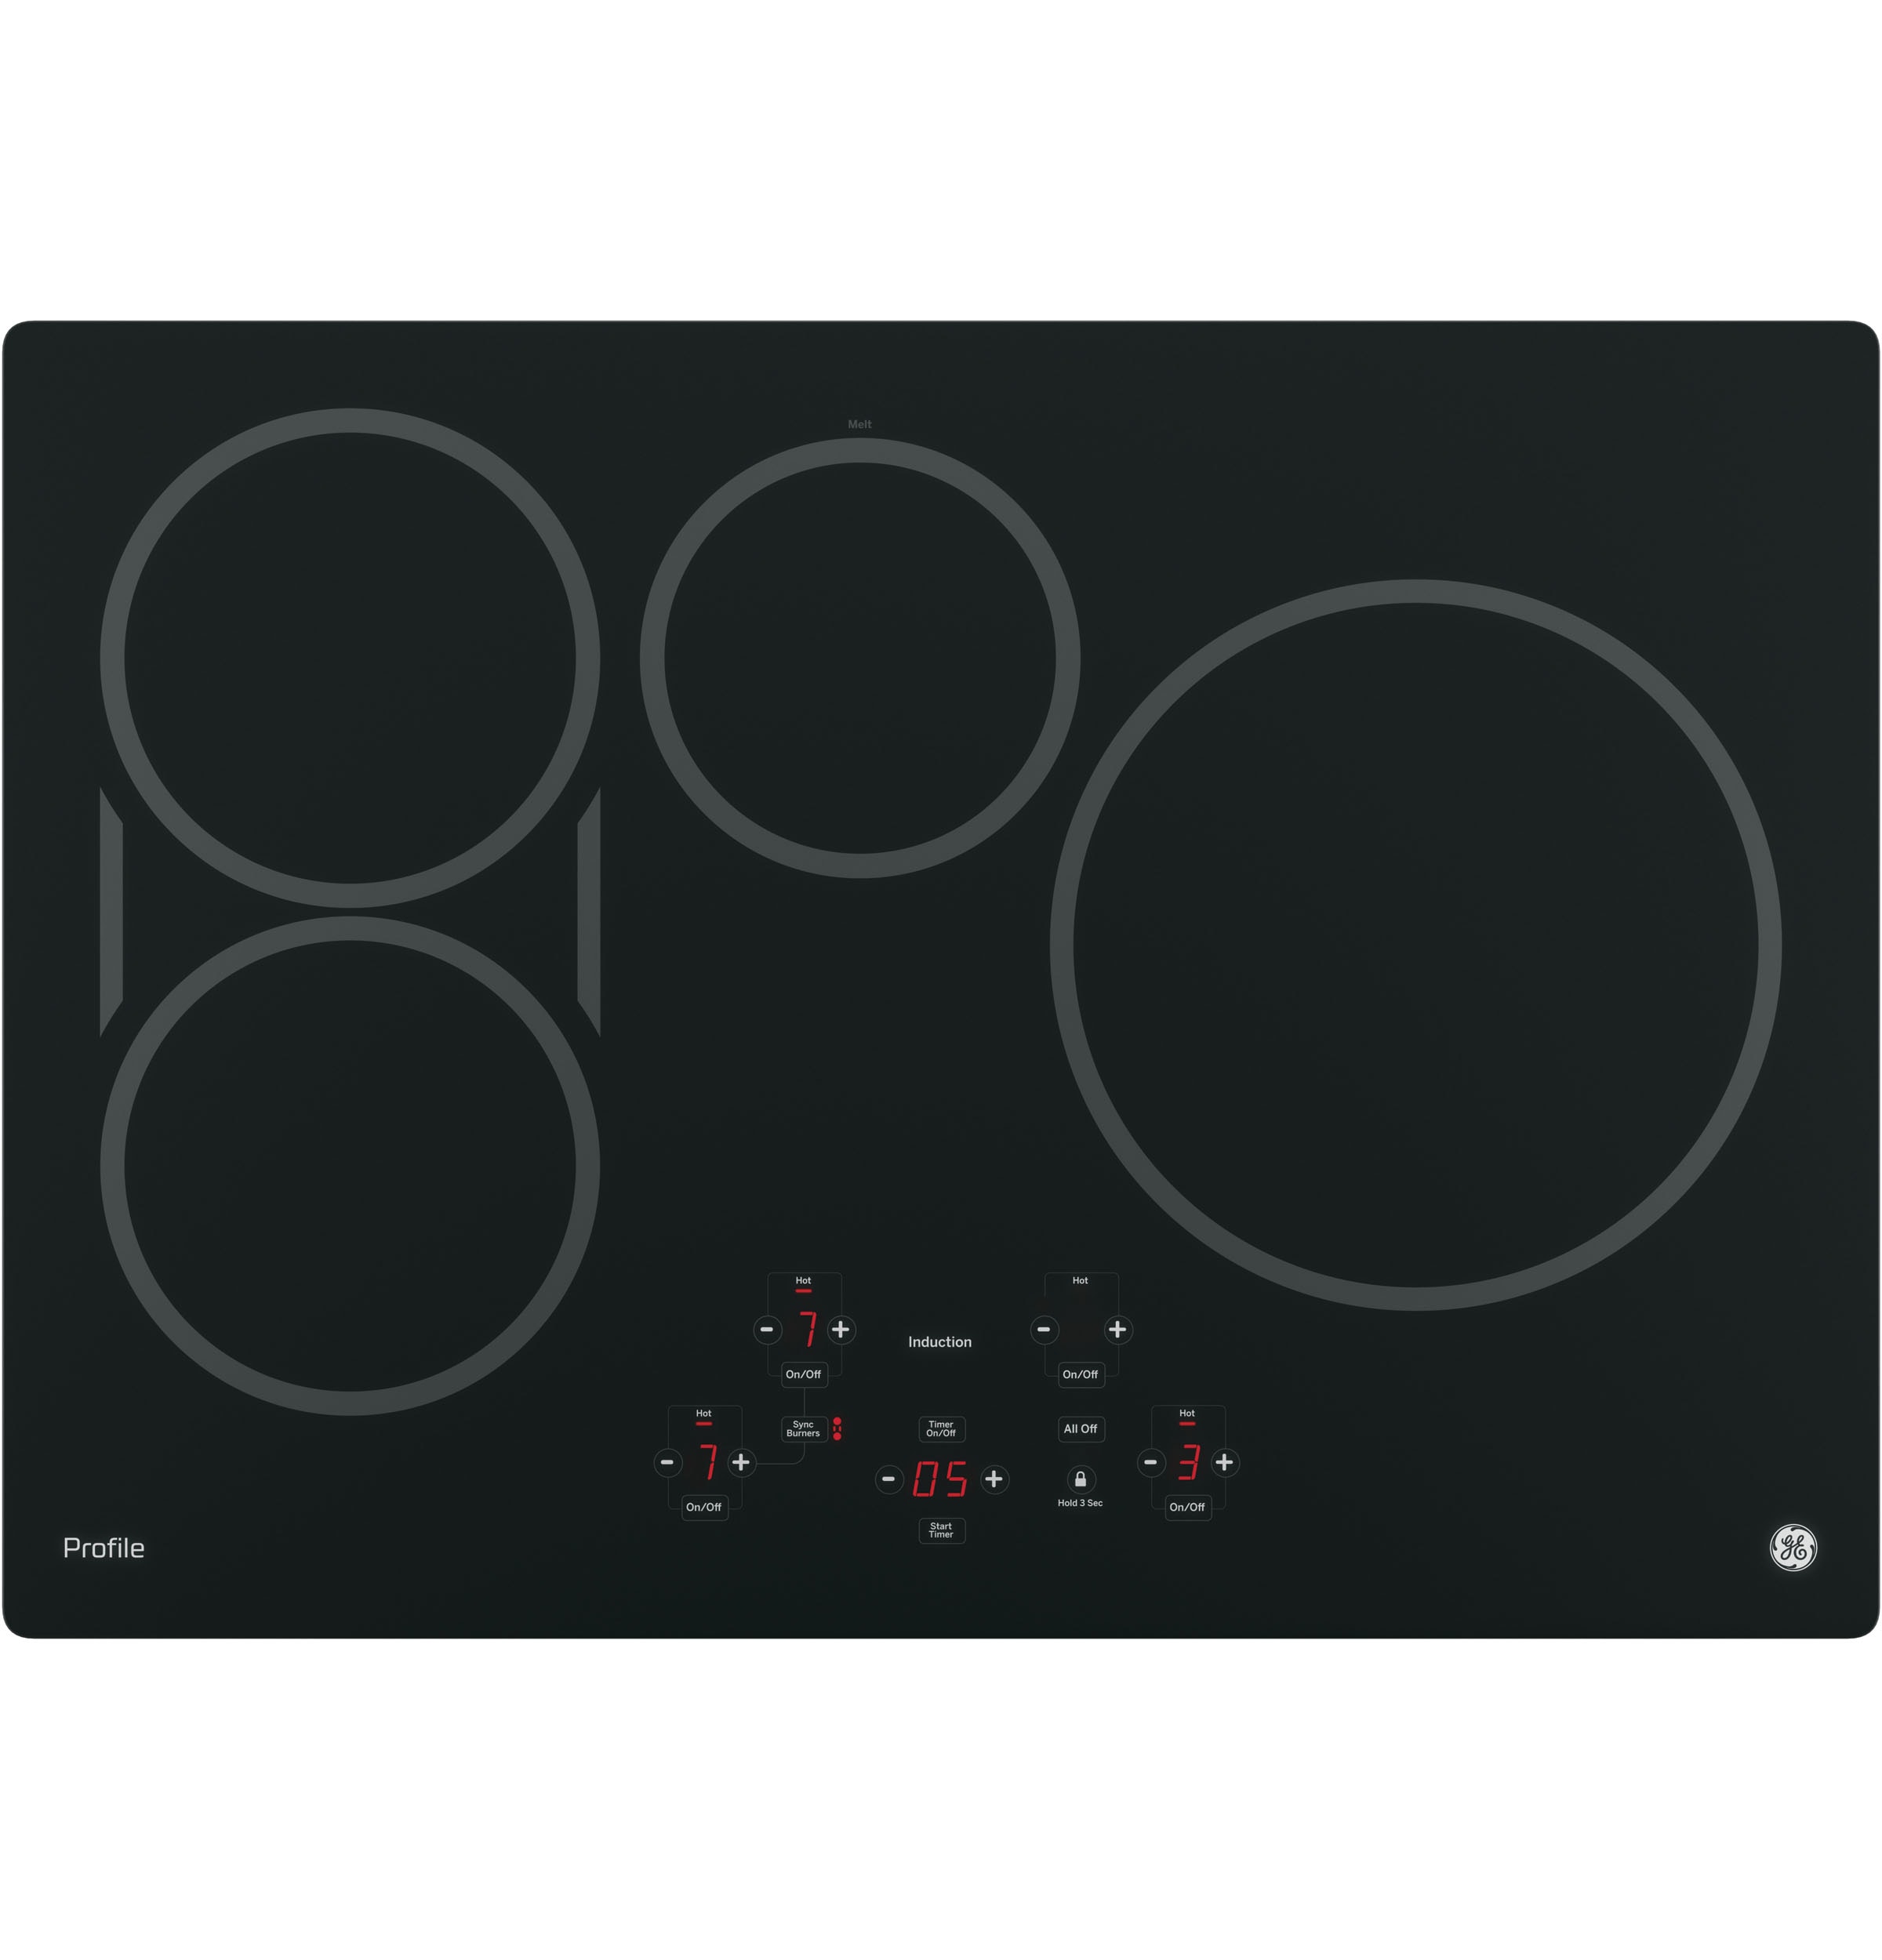 Black Induction Cooktop, General Electric Countertop Stove Parts List